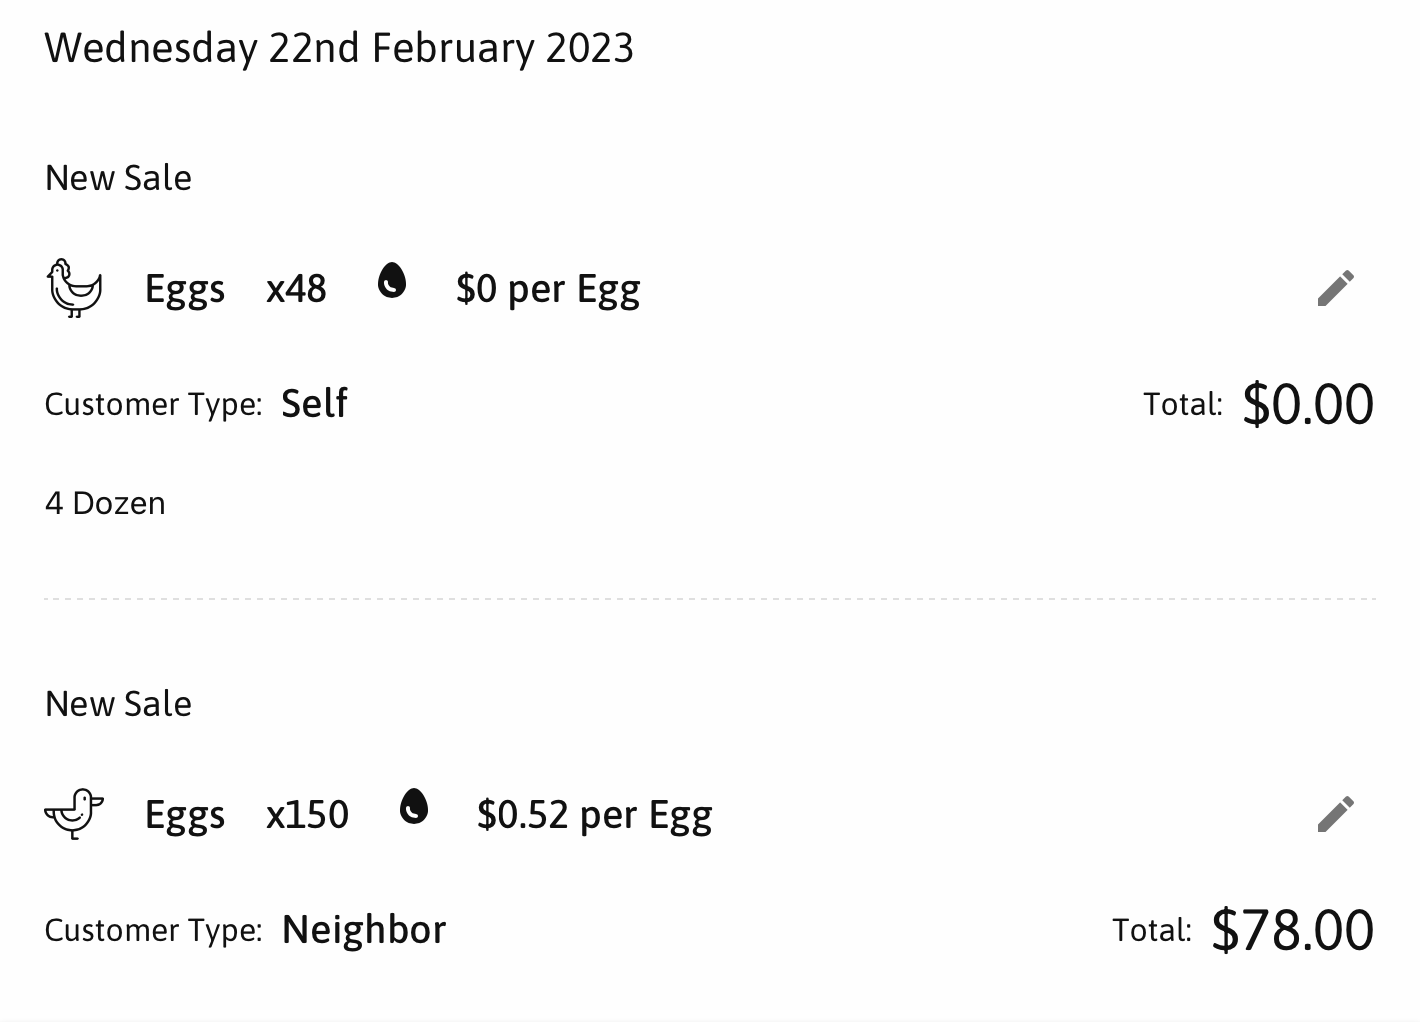 Record customer type and number of eggs sold